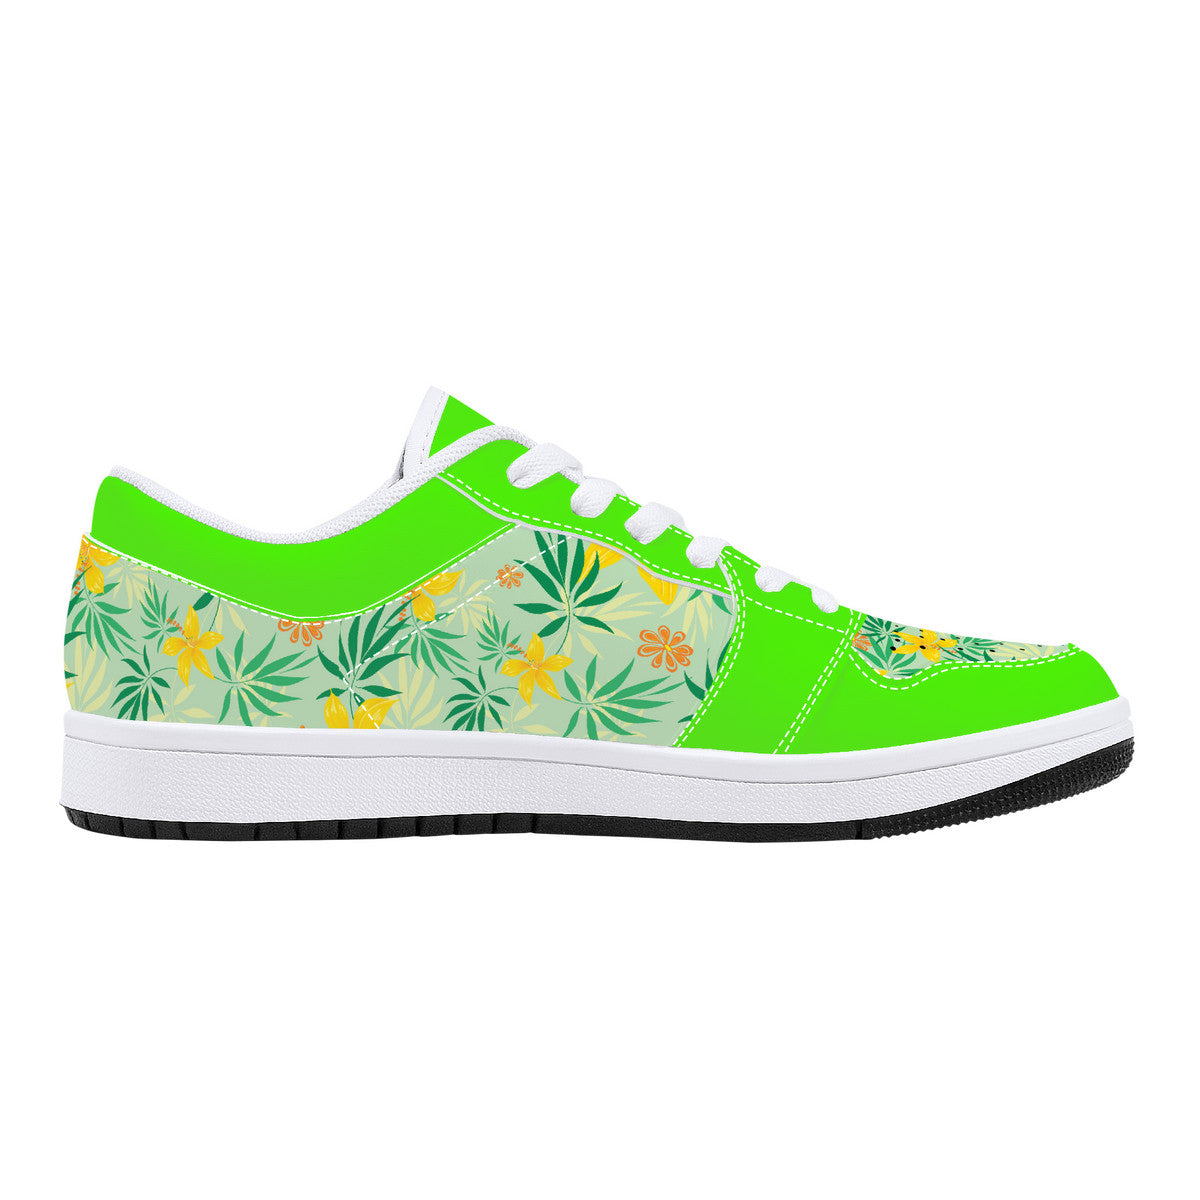 Low-Top Leather Sneakers - Spring Flowers - Green Trim